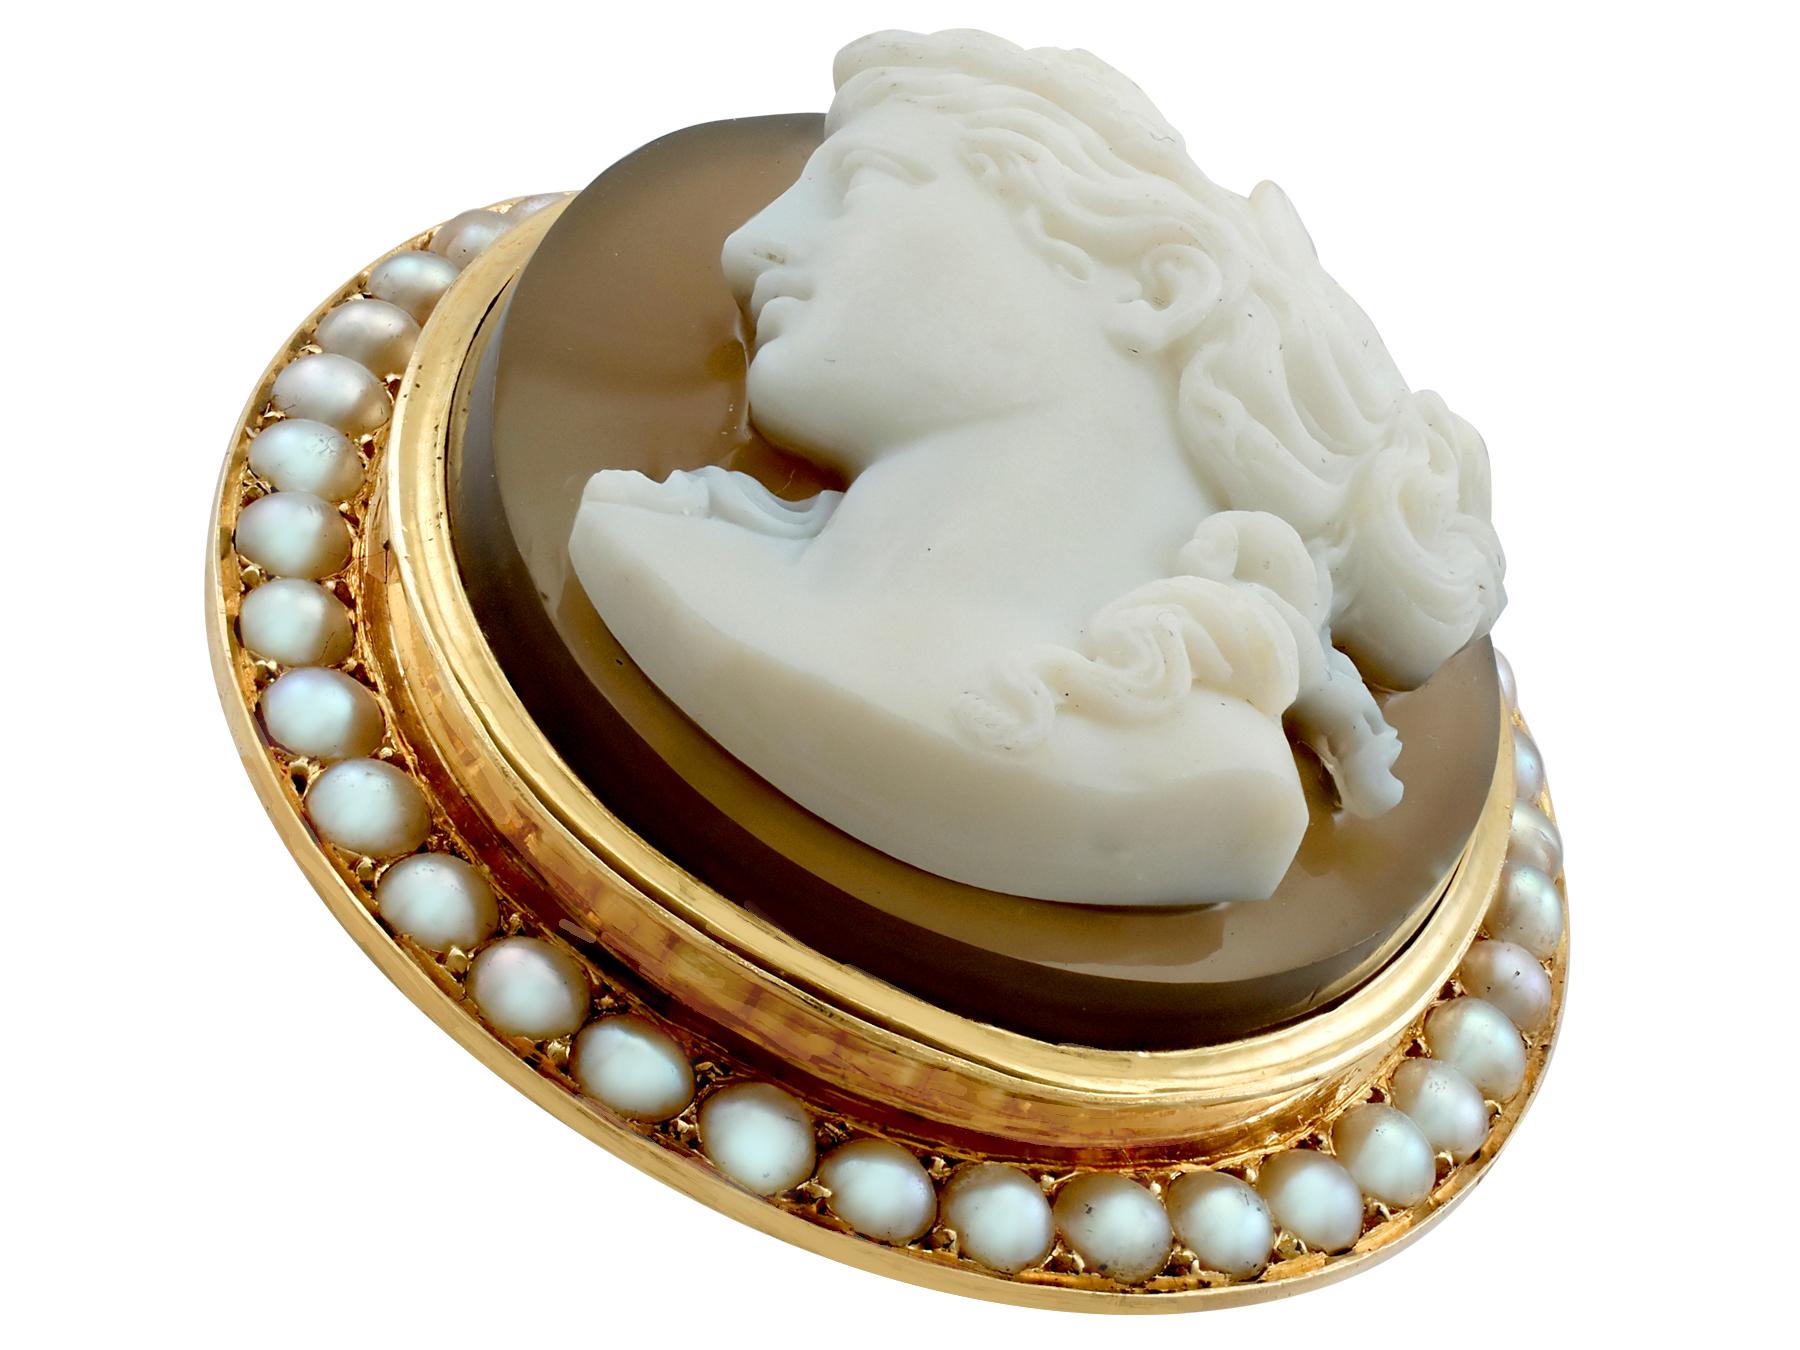 An impressive antique French agate and seed pearl, 18 karat yellow gold cameo brooch; part of our diverse antique jewelry and estate jewelry collections.

This fine and impressive antique cameo brooch with diamonds has been crafted in 18k yellow